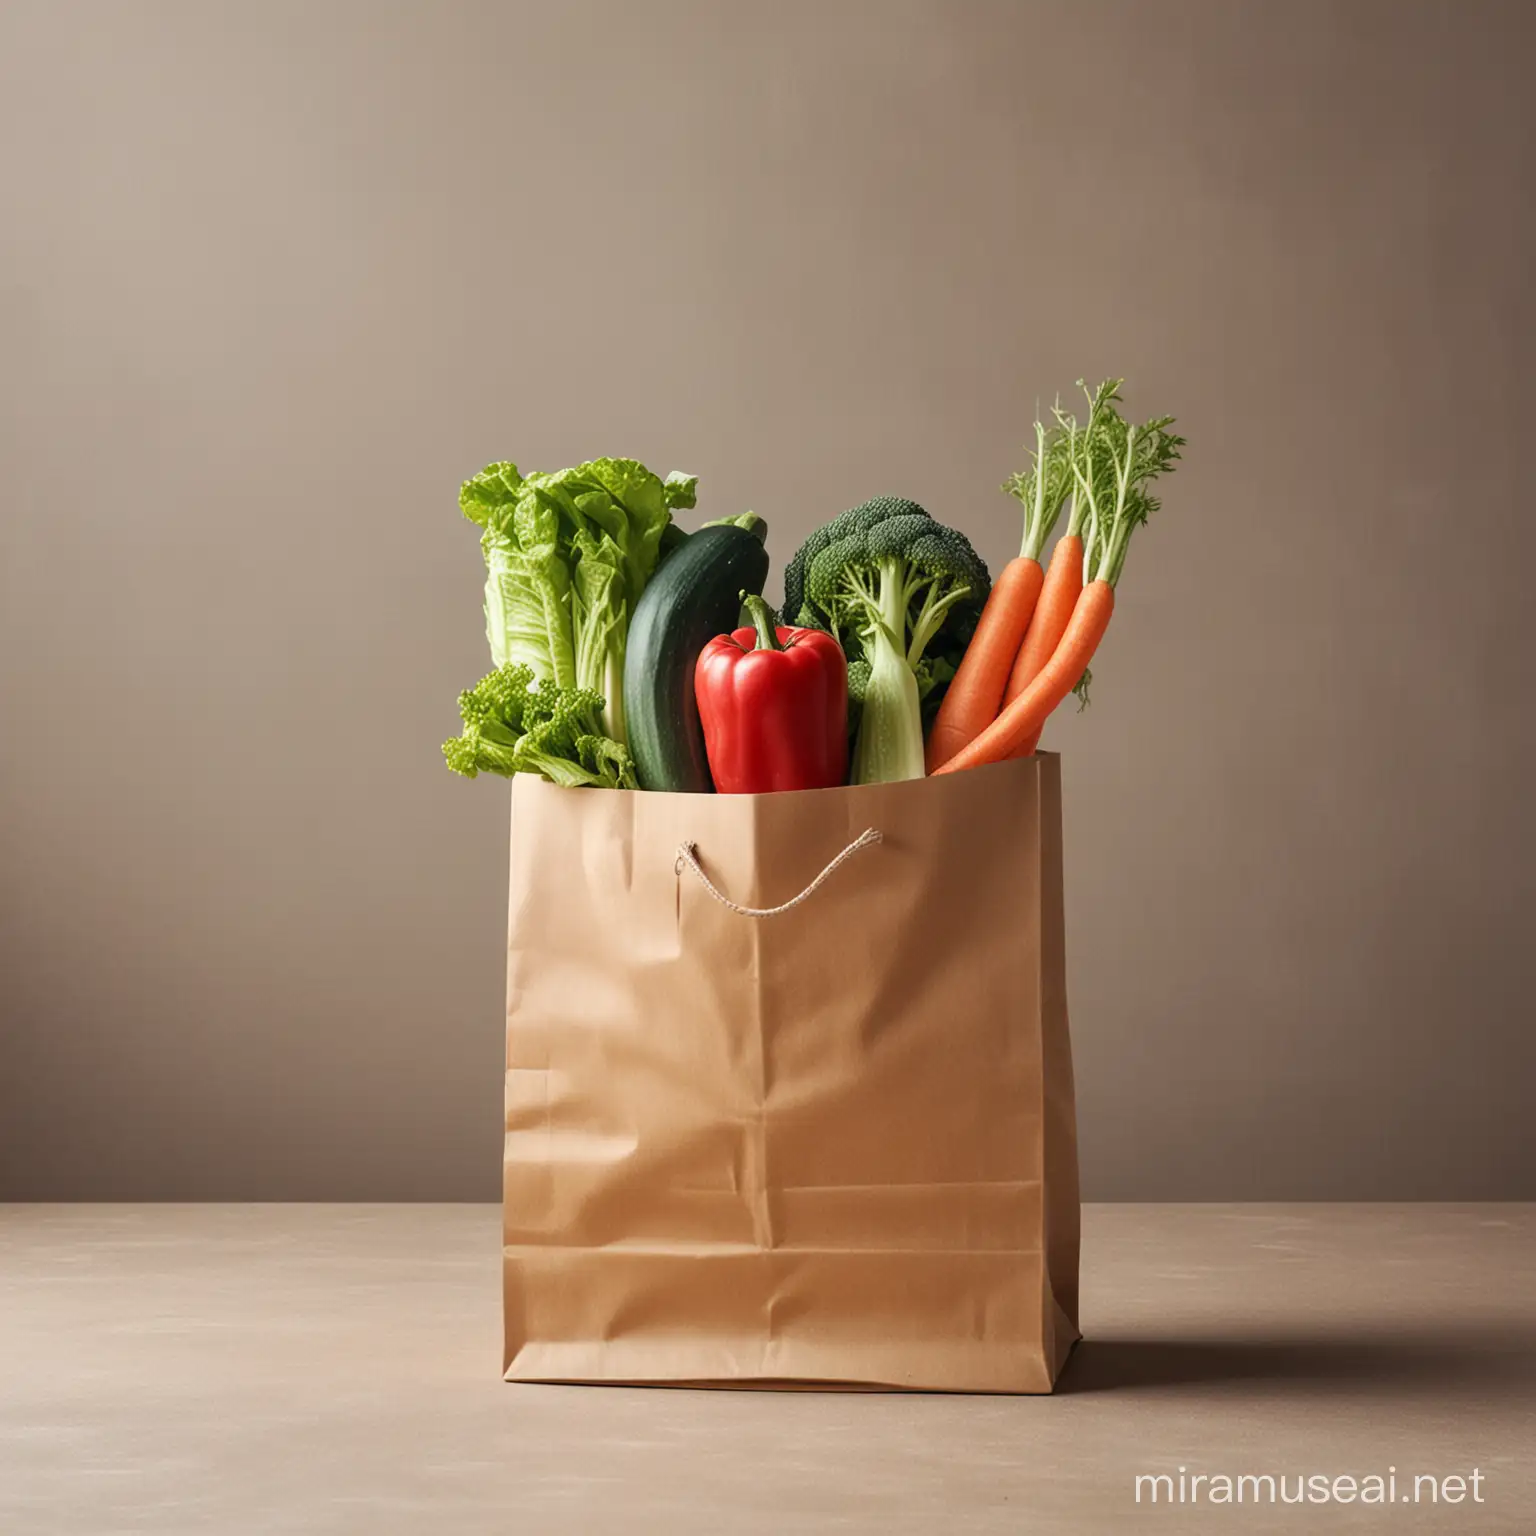 adv for supermarket with a paper bag full of vegetables
